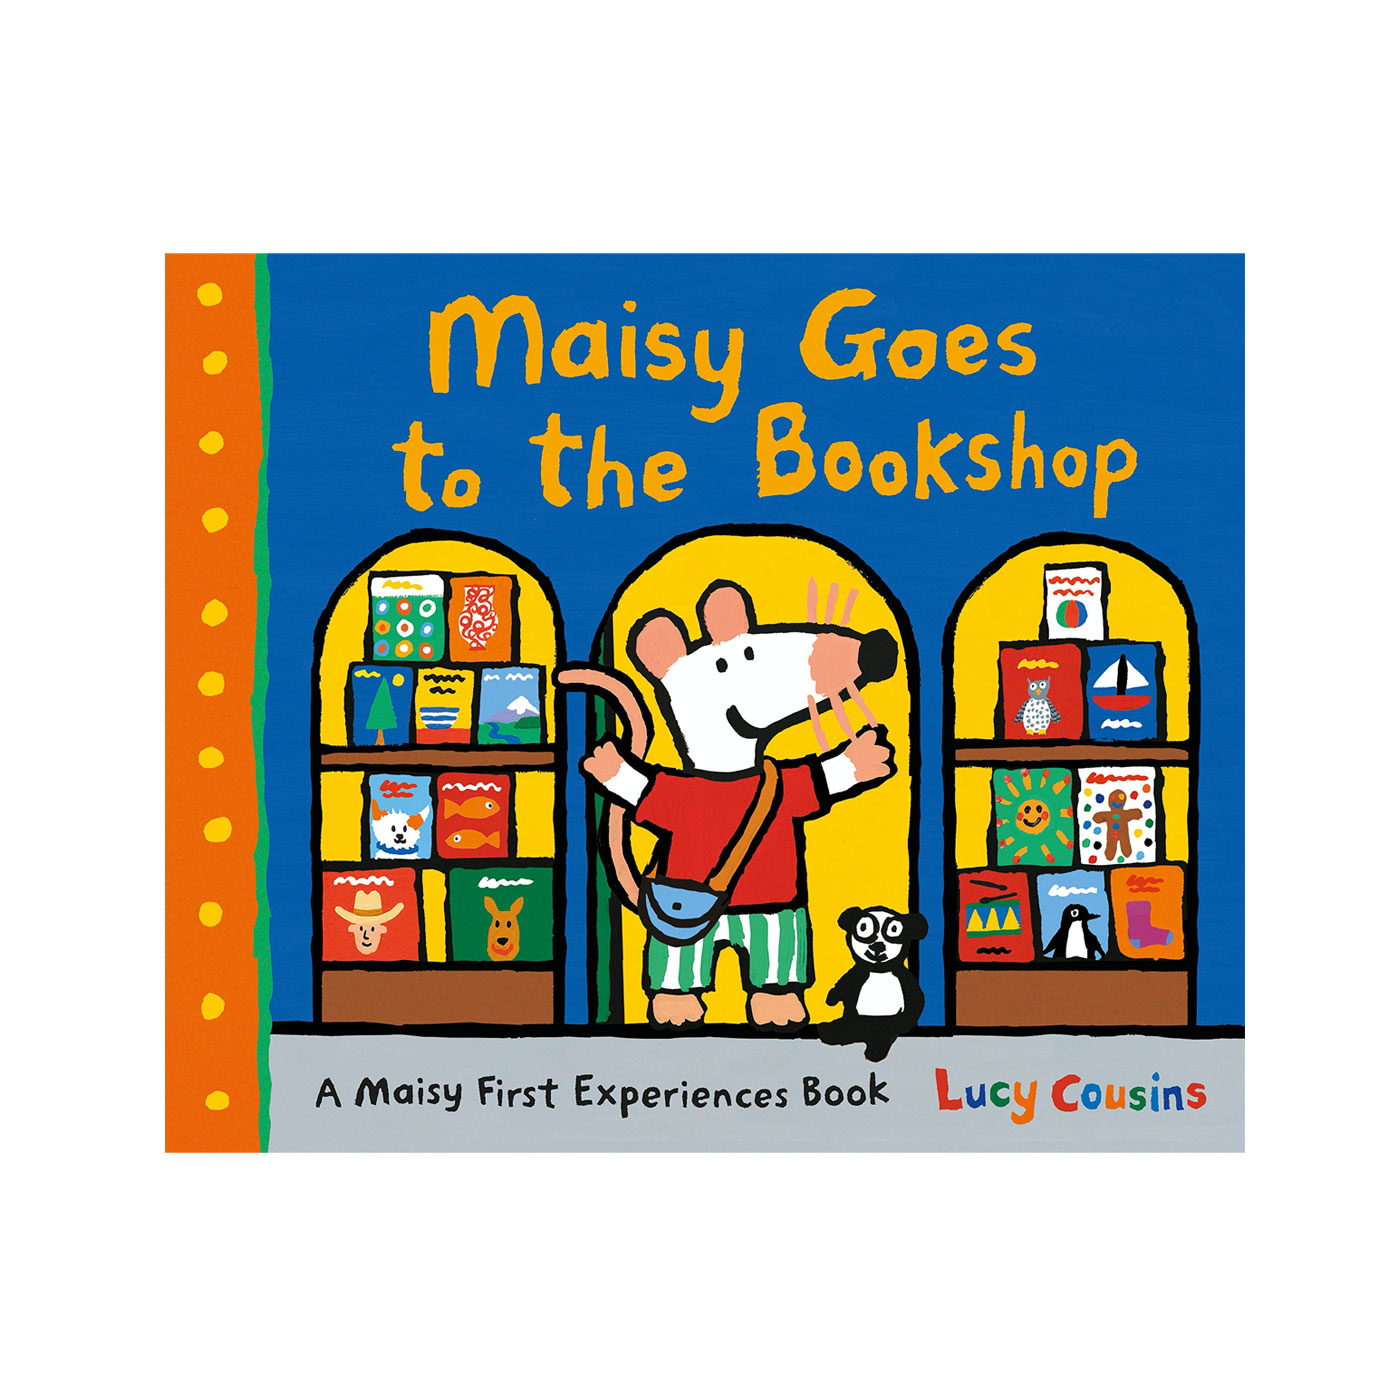  Maisy Goes To The Bookshop